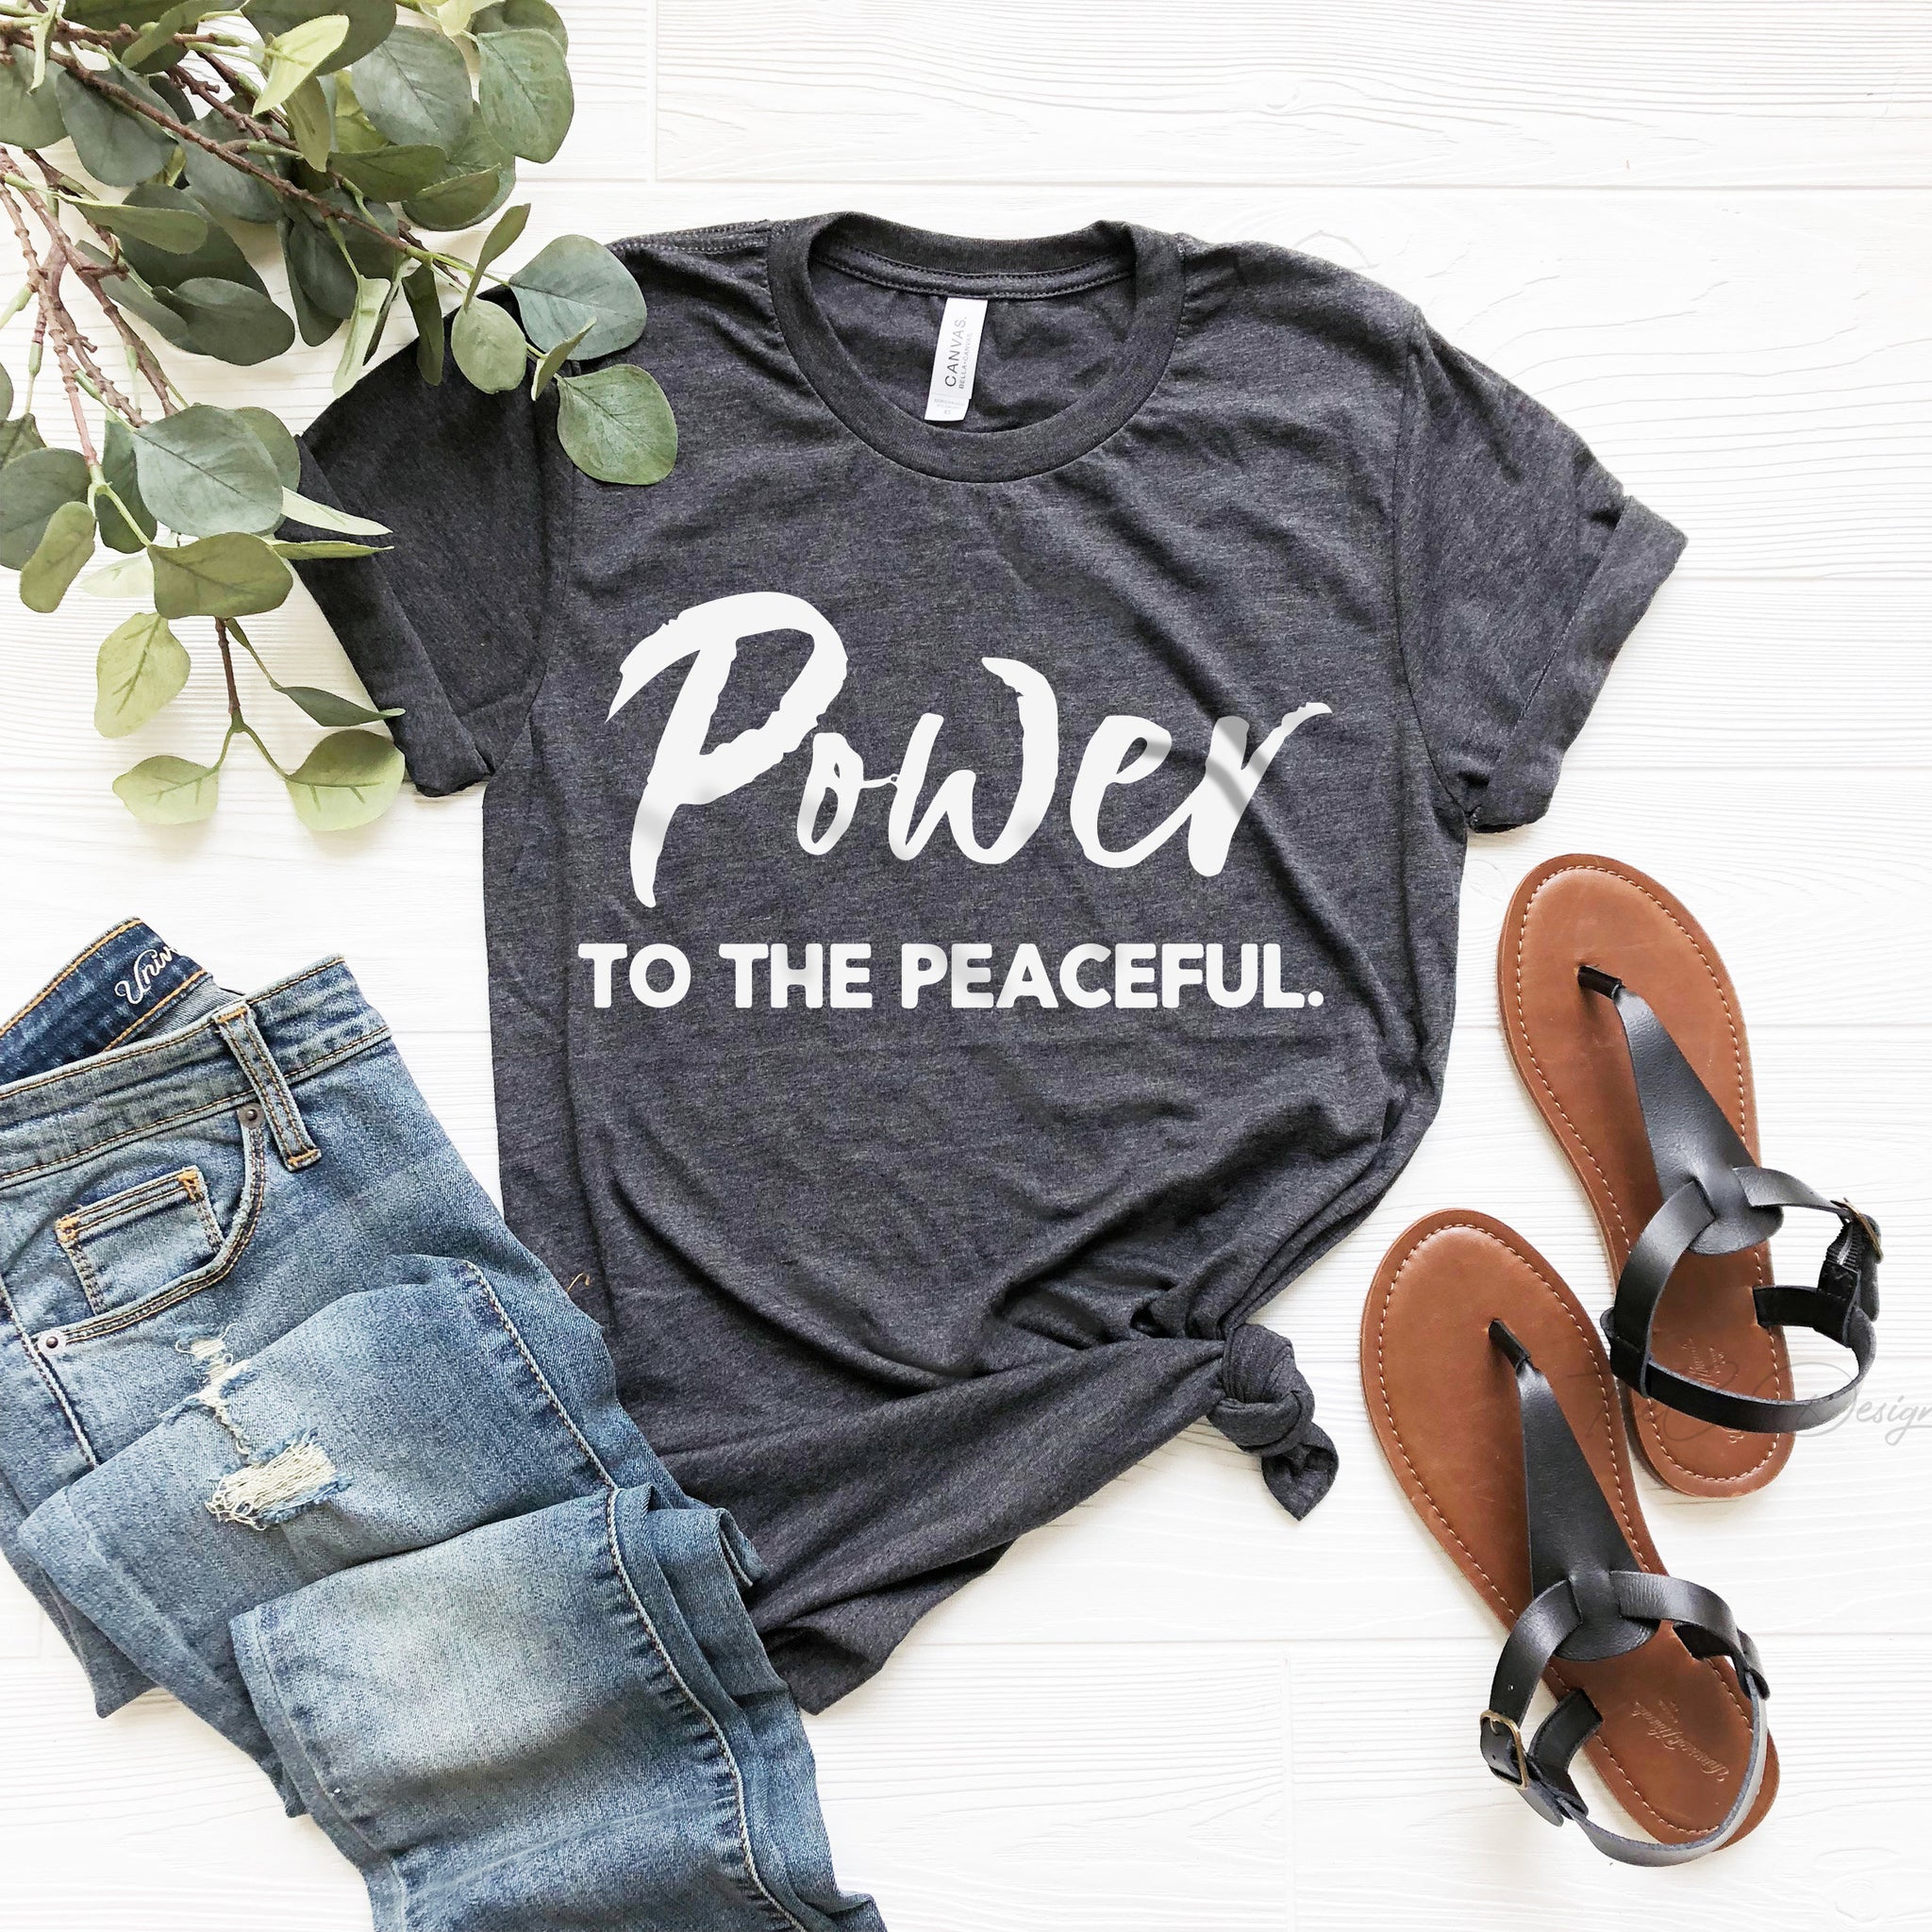 Power to the Peaceful, Christian Apparel, Christian Tees, Christian T-Shirts, Religious Clothing, Jesus Clothing, Faith, Motivational shirt - Fastdeliverytees.com